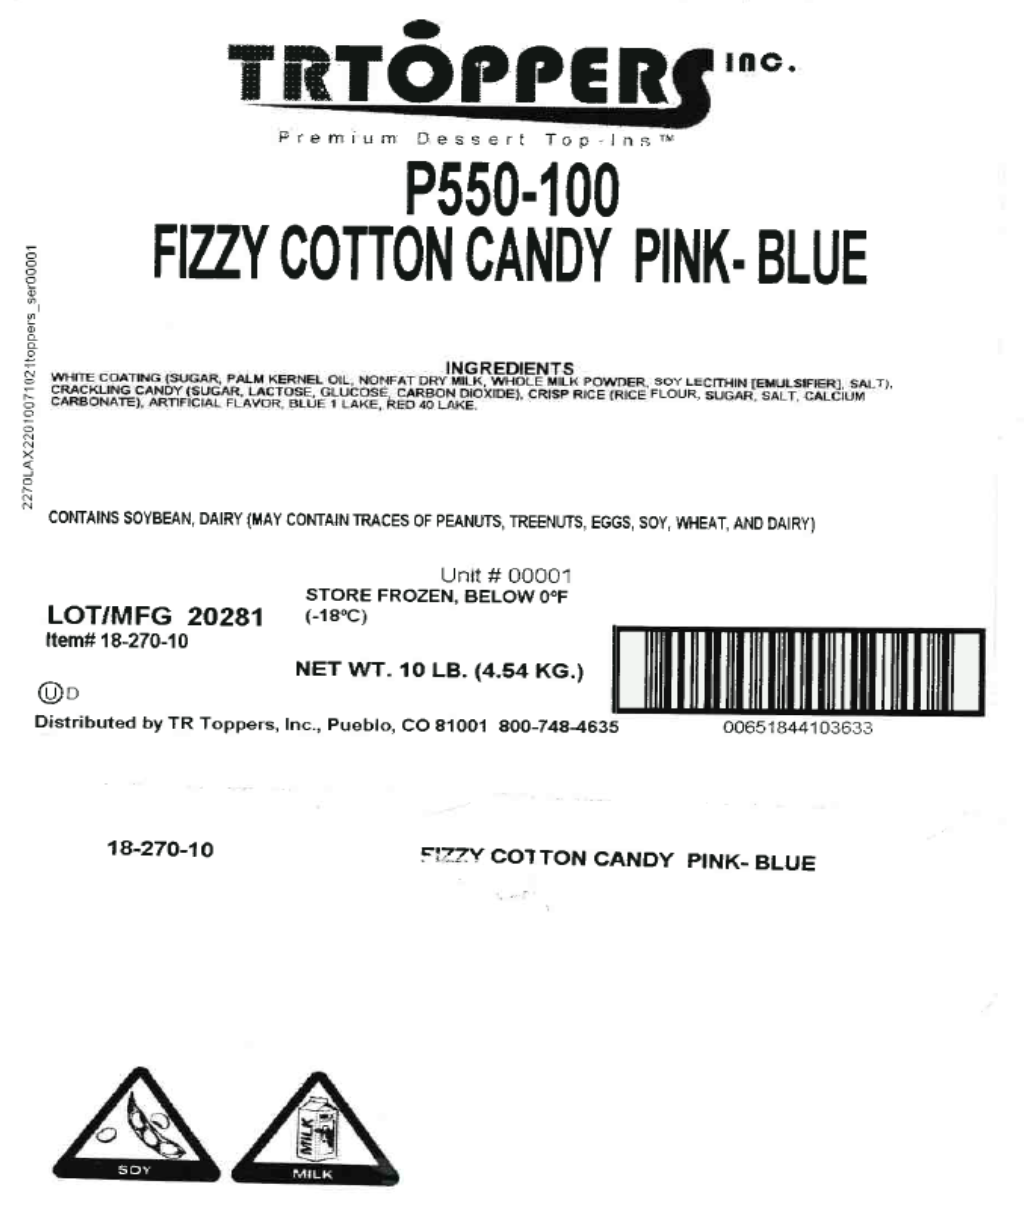 Fizzy Cotton Candy Pink-Blue Candy Toppings | TR Toppers P550-100 | Premium Dessert Toppings, Mix-Ins and Inclusions | Canadian Distribution